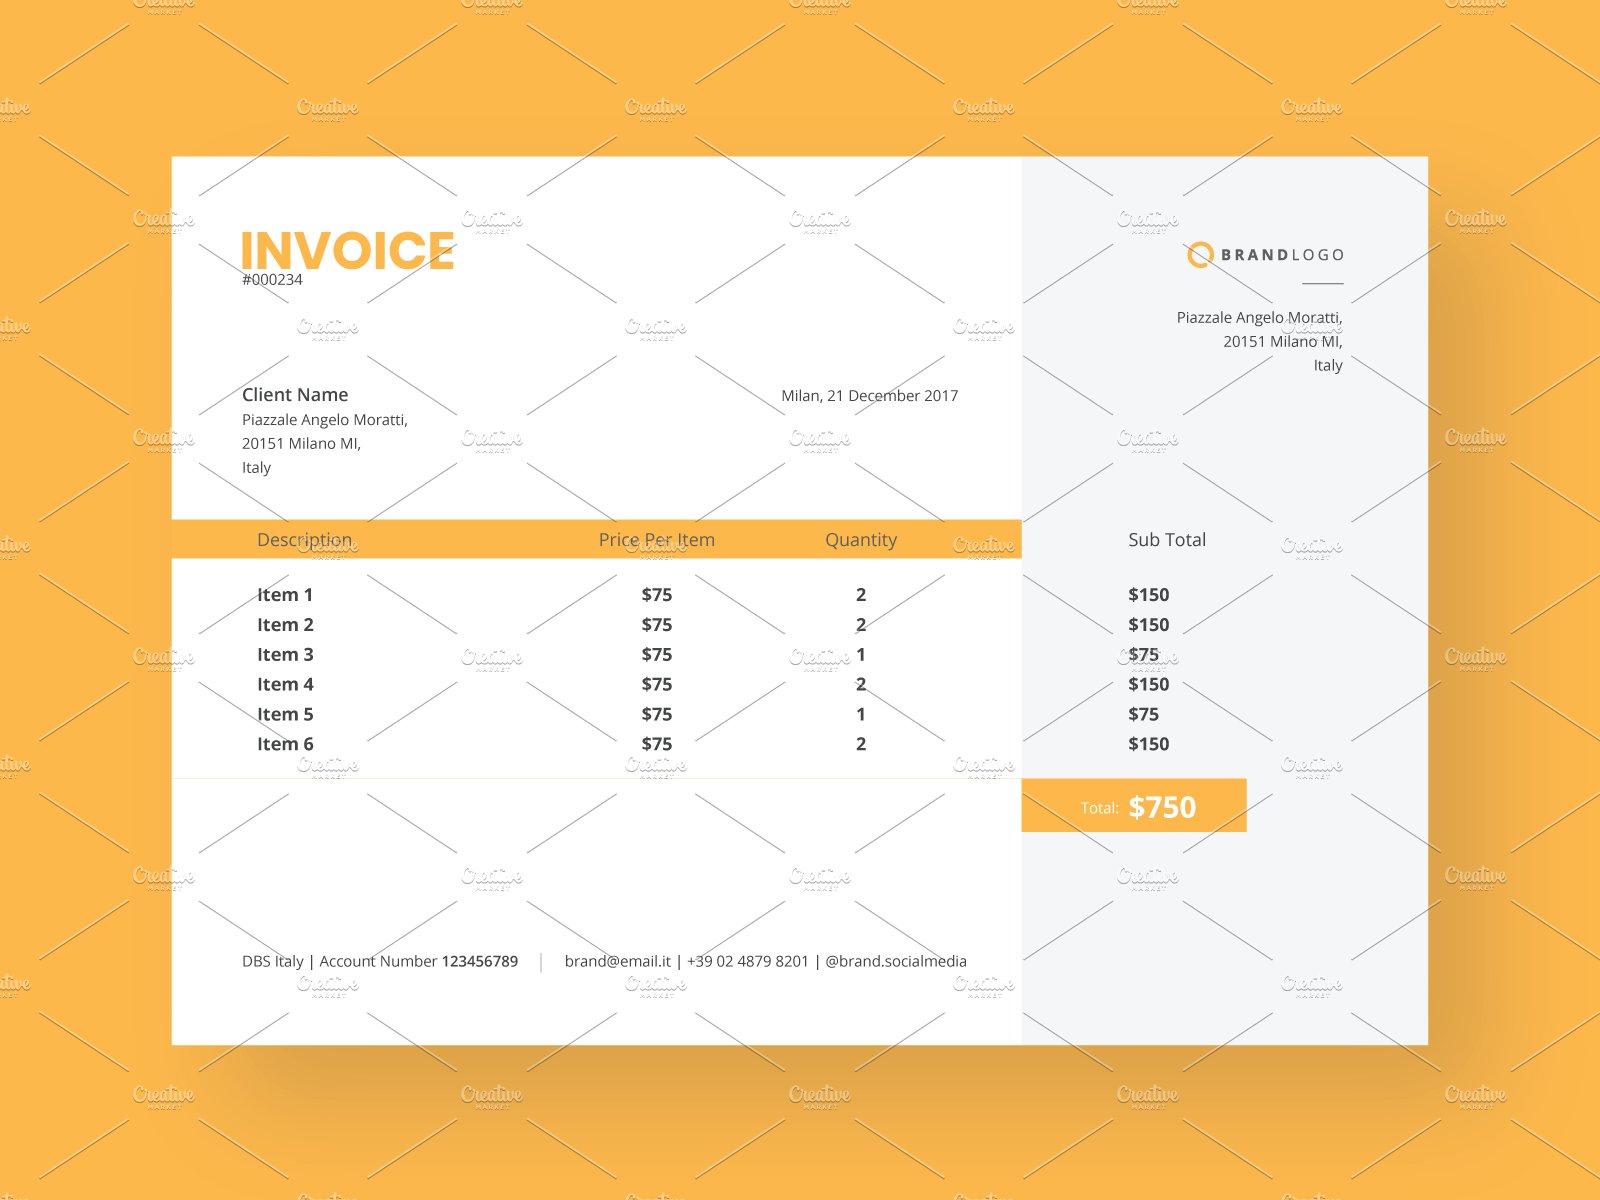 Clean Invoice Design Template cover image.